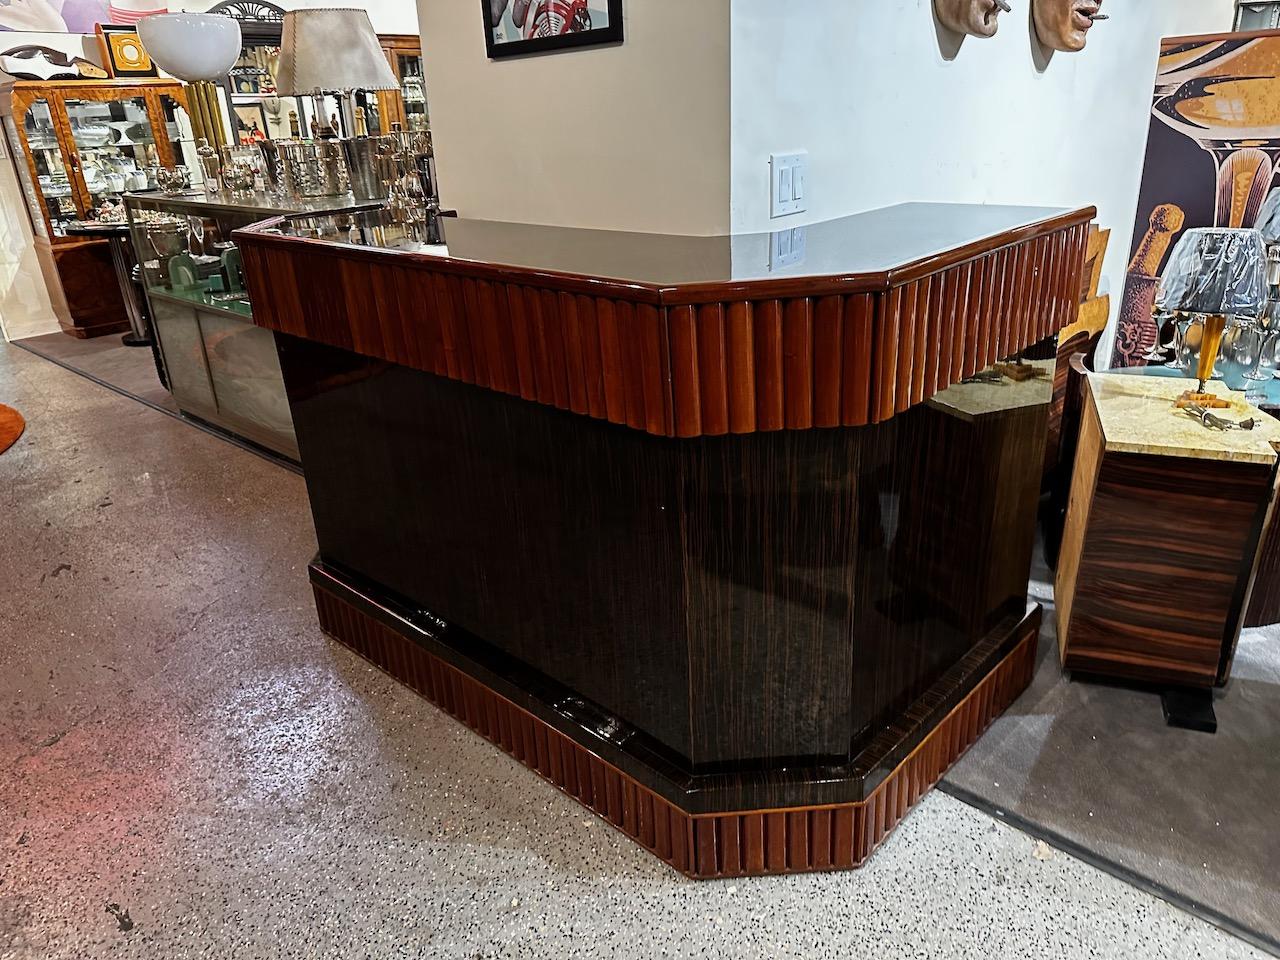 Art Deco L Shaped Stand Behind Macassar Bar and 3 Bar Stools. Original and restored bar with many extra storage features in the back, multiple shelves, drawers, and space to outfit even the most over-stocked back bar. The L shape of the bar is great